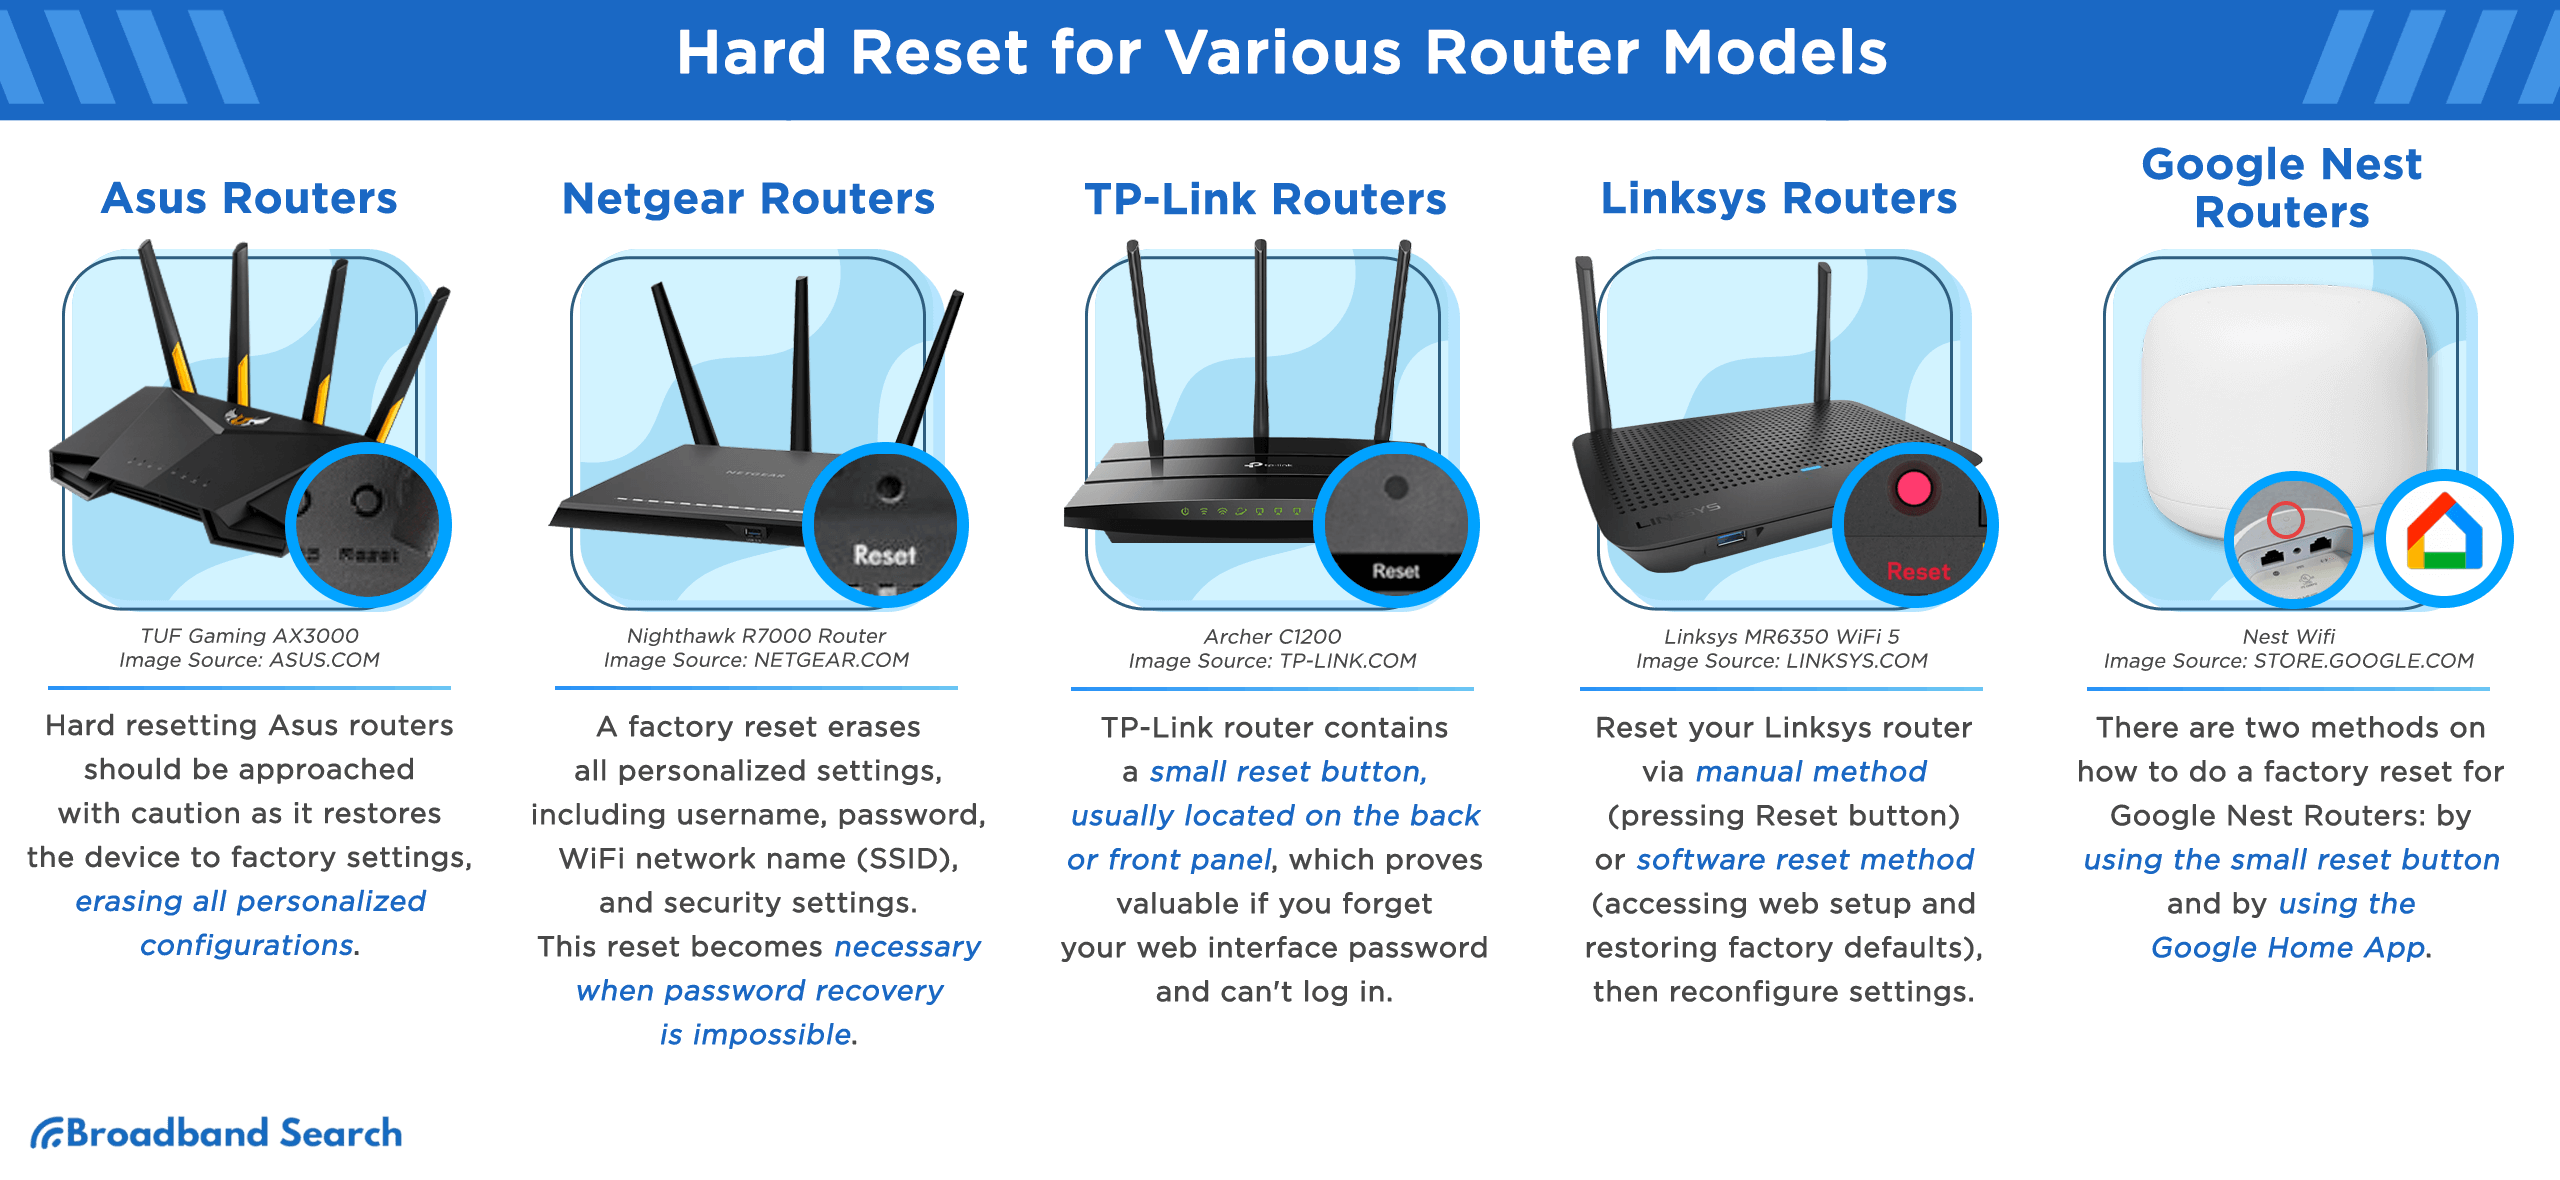 How to Reset a Router Remotely